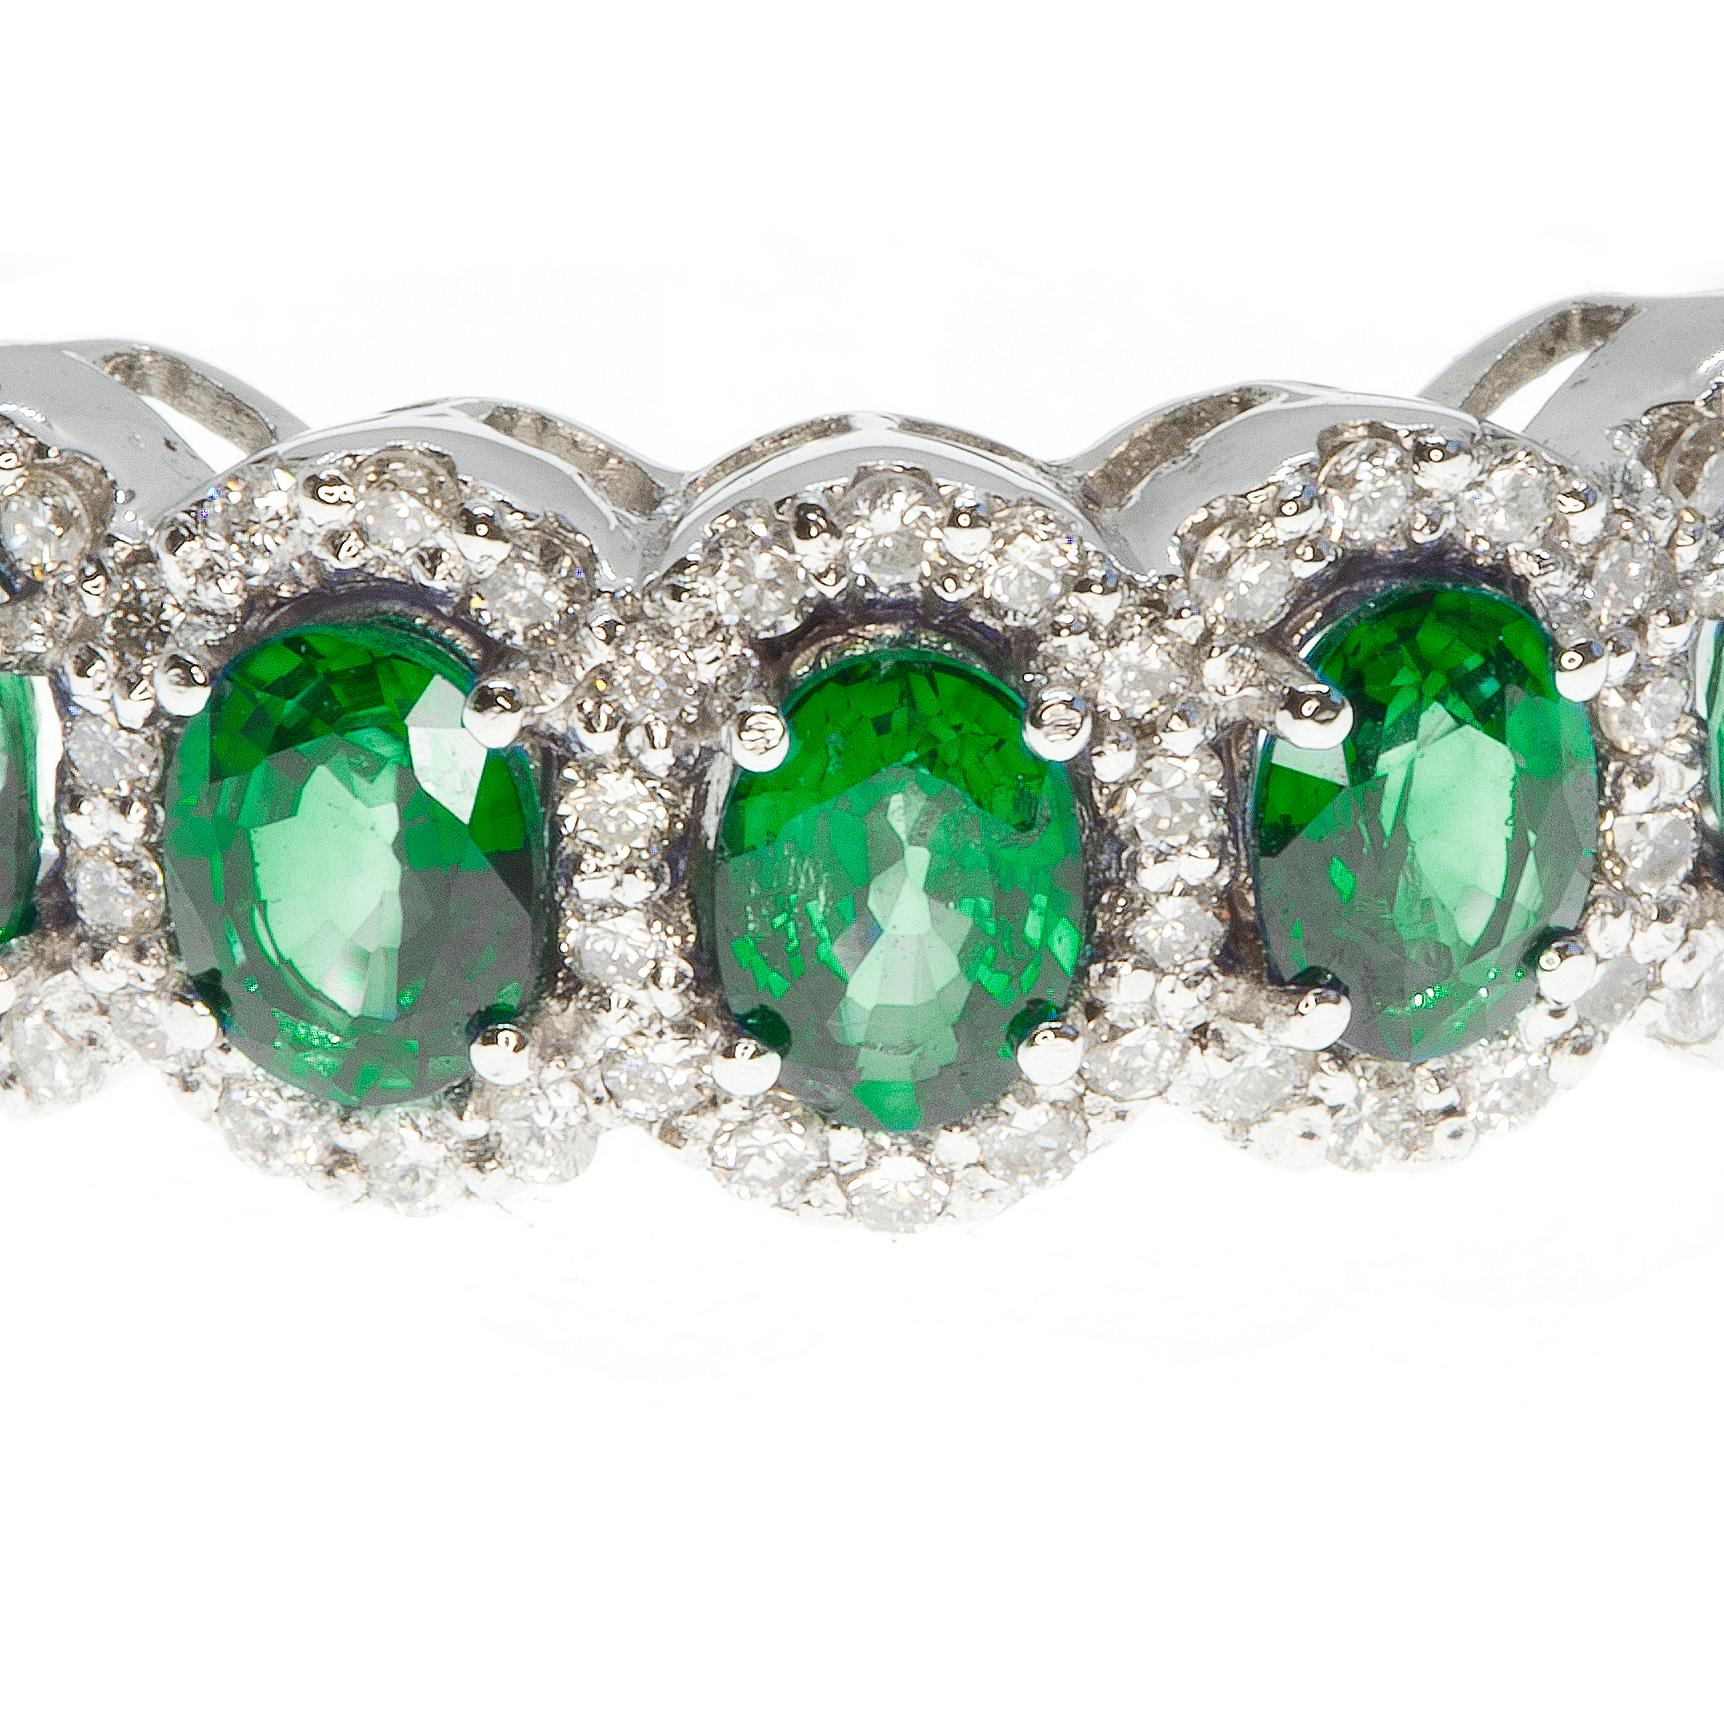 A beautiful ring, masterfully created entirely by hand and featuring carefully selected emeralds and white diamonds. The ring has been made from 18-karat white gold.

The ring is equally beautiful on its own or as the jewel of a stack of rings. The